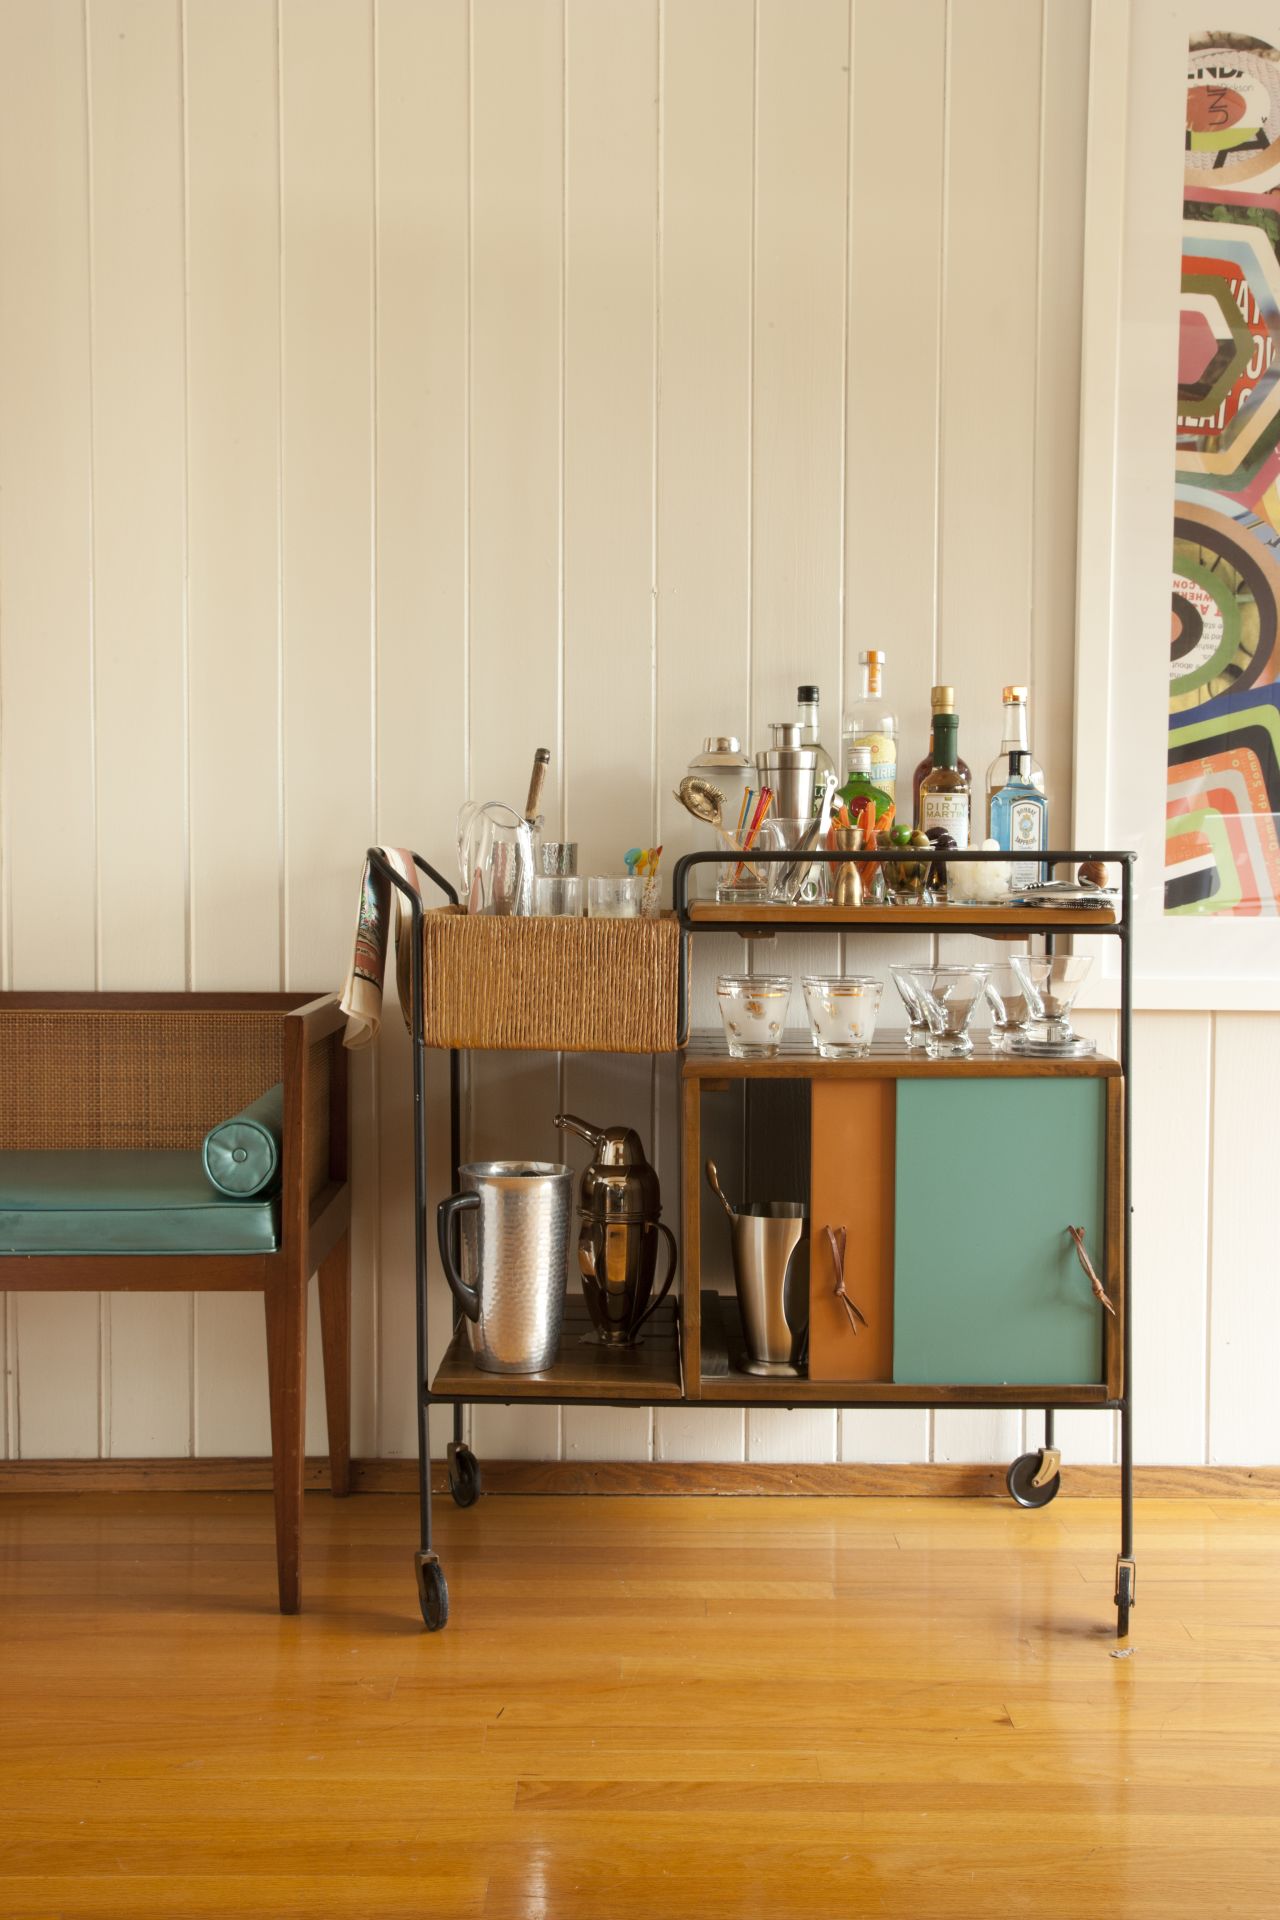 This bar cart, featured in the current issue of Southern Living, has mid-century modern flair.